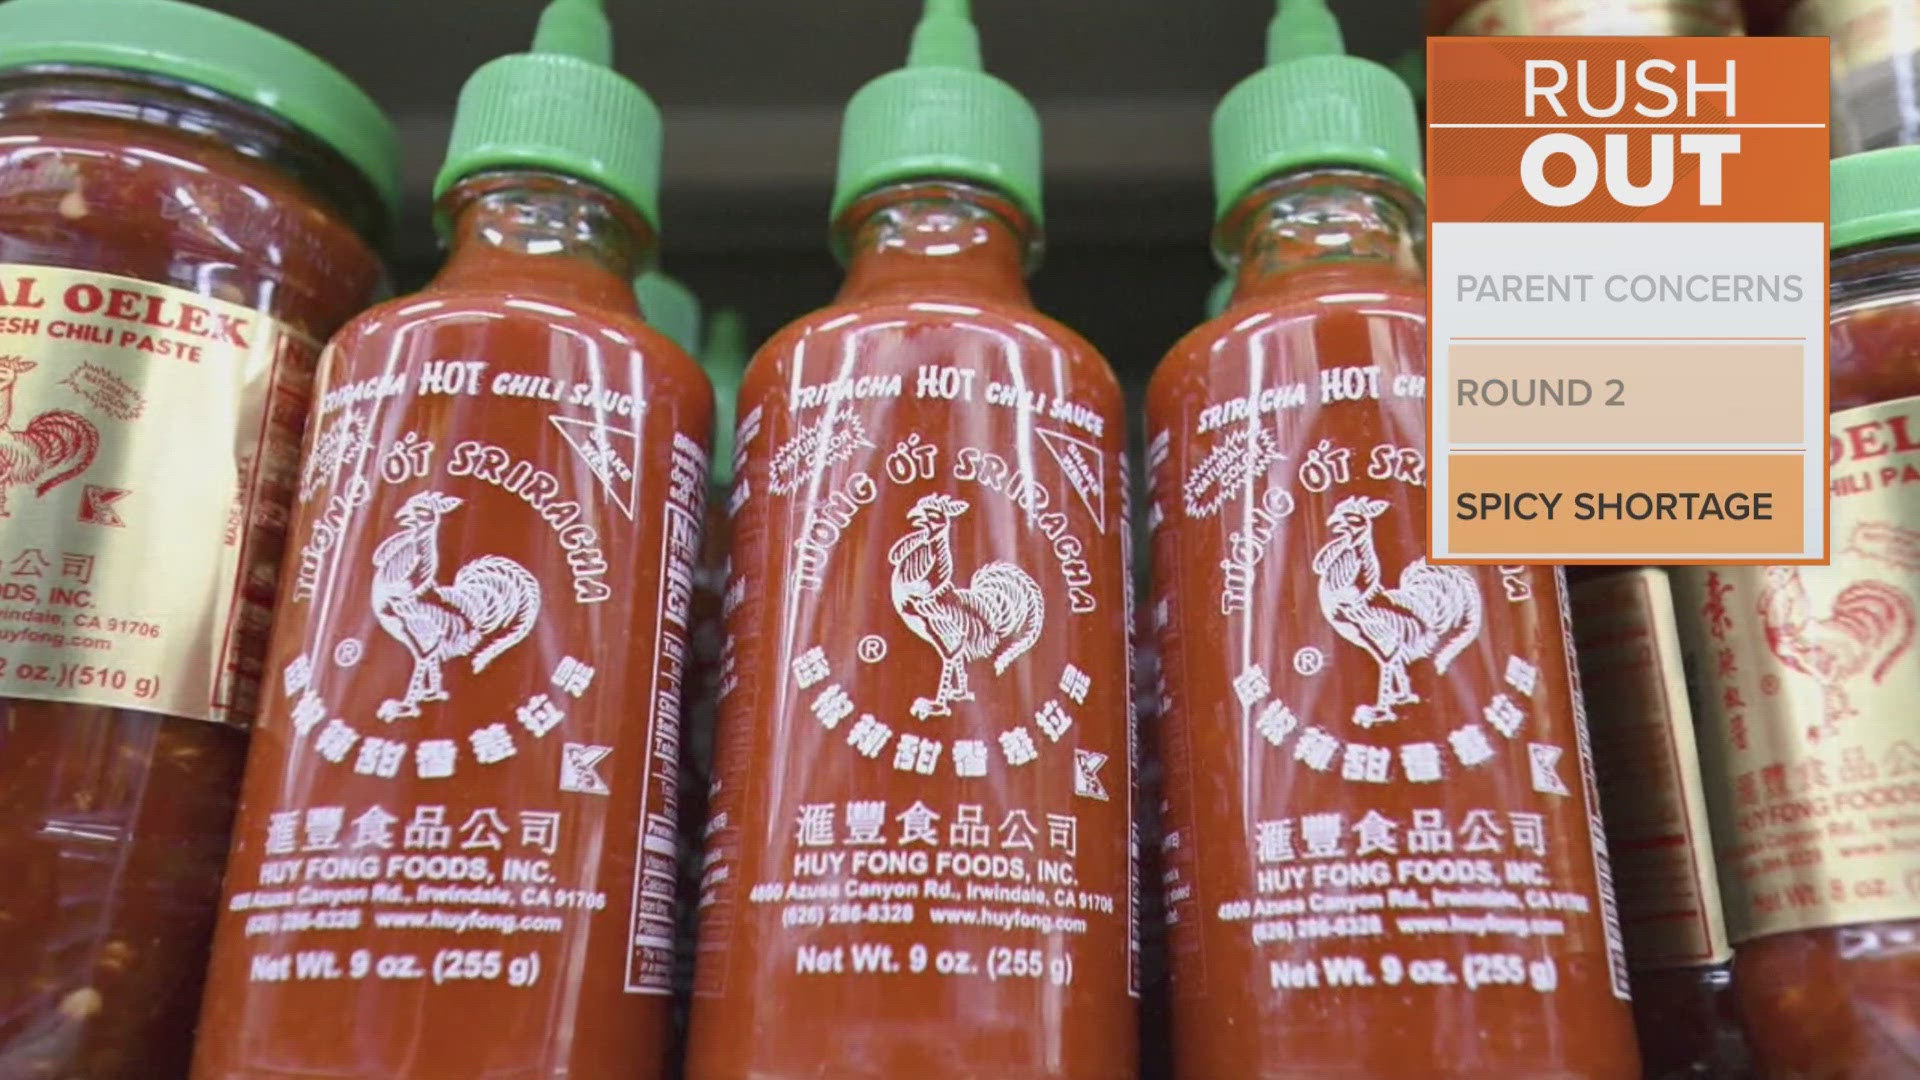 The company that makes the iconic siracha sauce said they have to stop production until labor day.